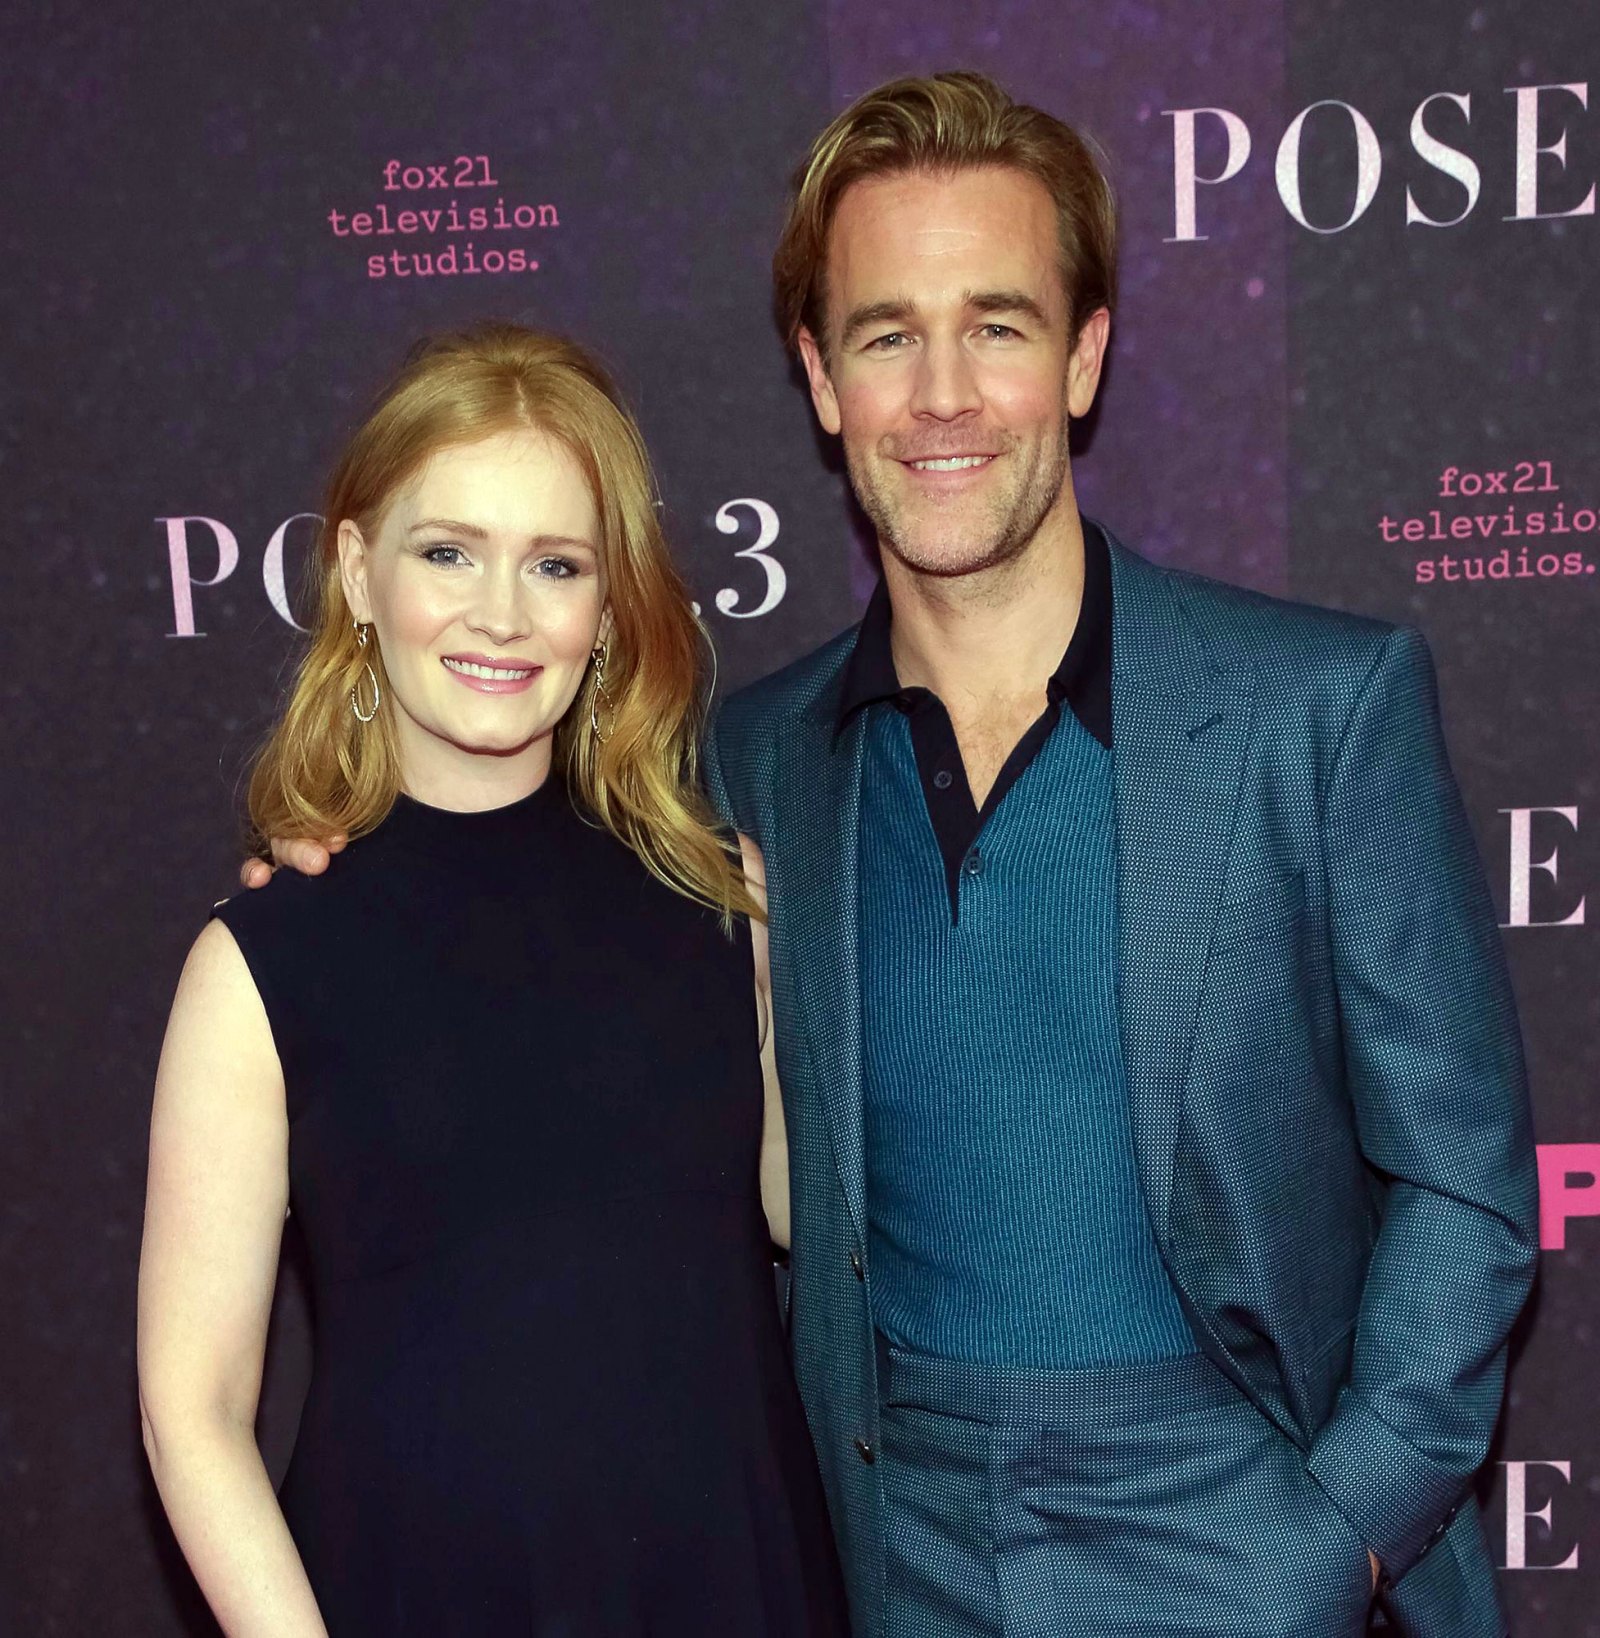 James Van Der Beek and Wife Kimberly Secretly Welcome 6th Child After Previous Miscarriage